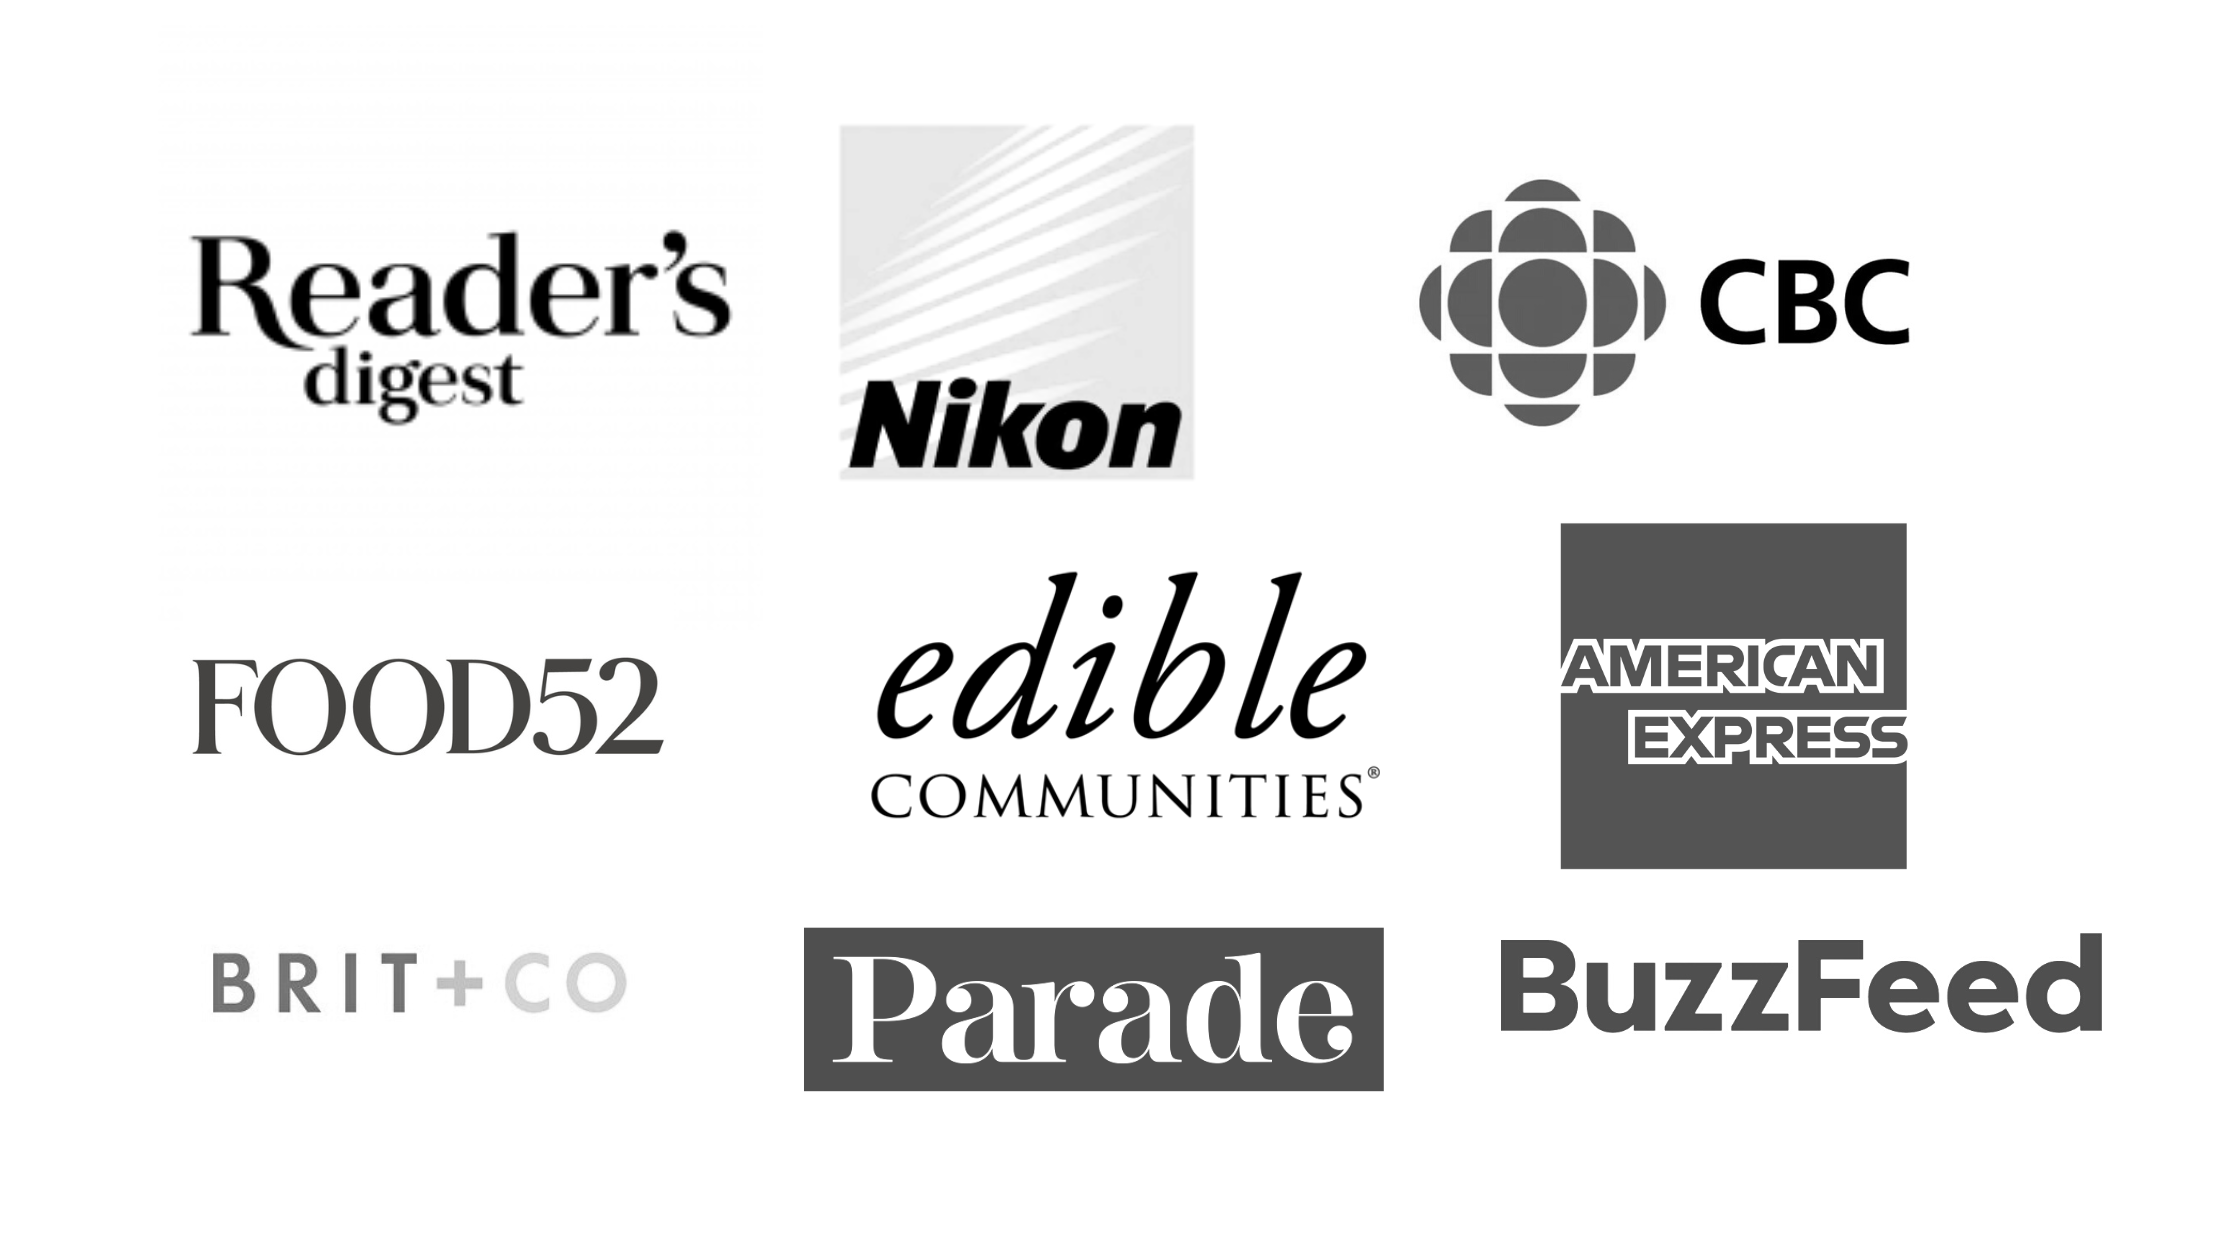 As Seen In logos for Nikon, CBC, Readers Digest, Brit+Co, AMEX, Parade, Food52, Edible Communities.